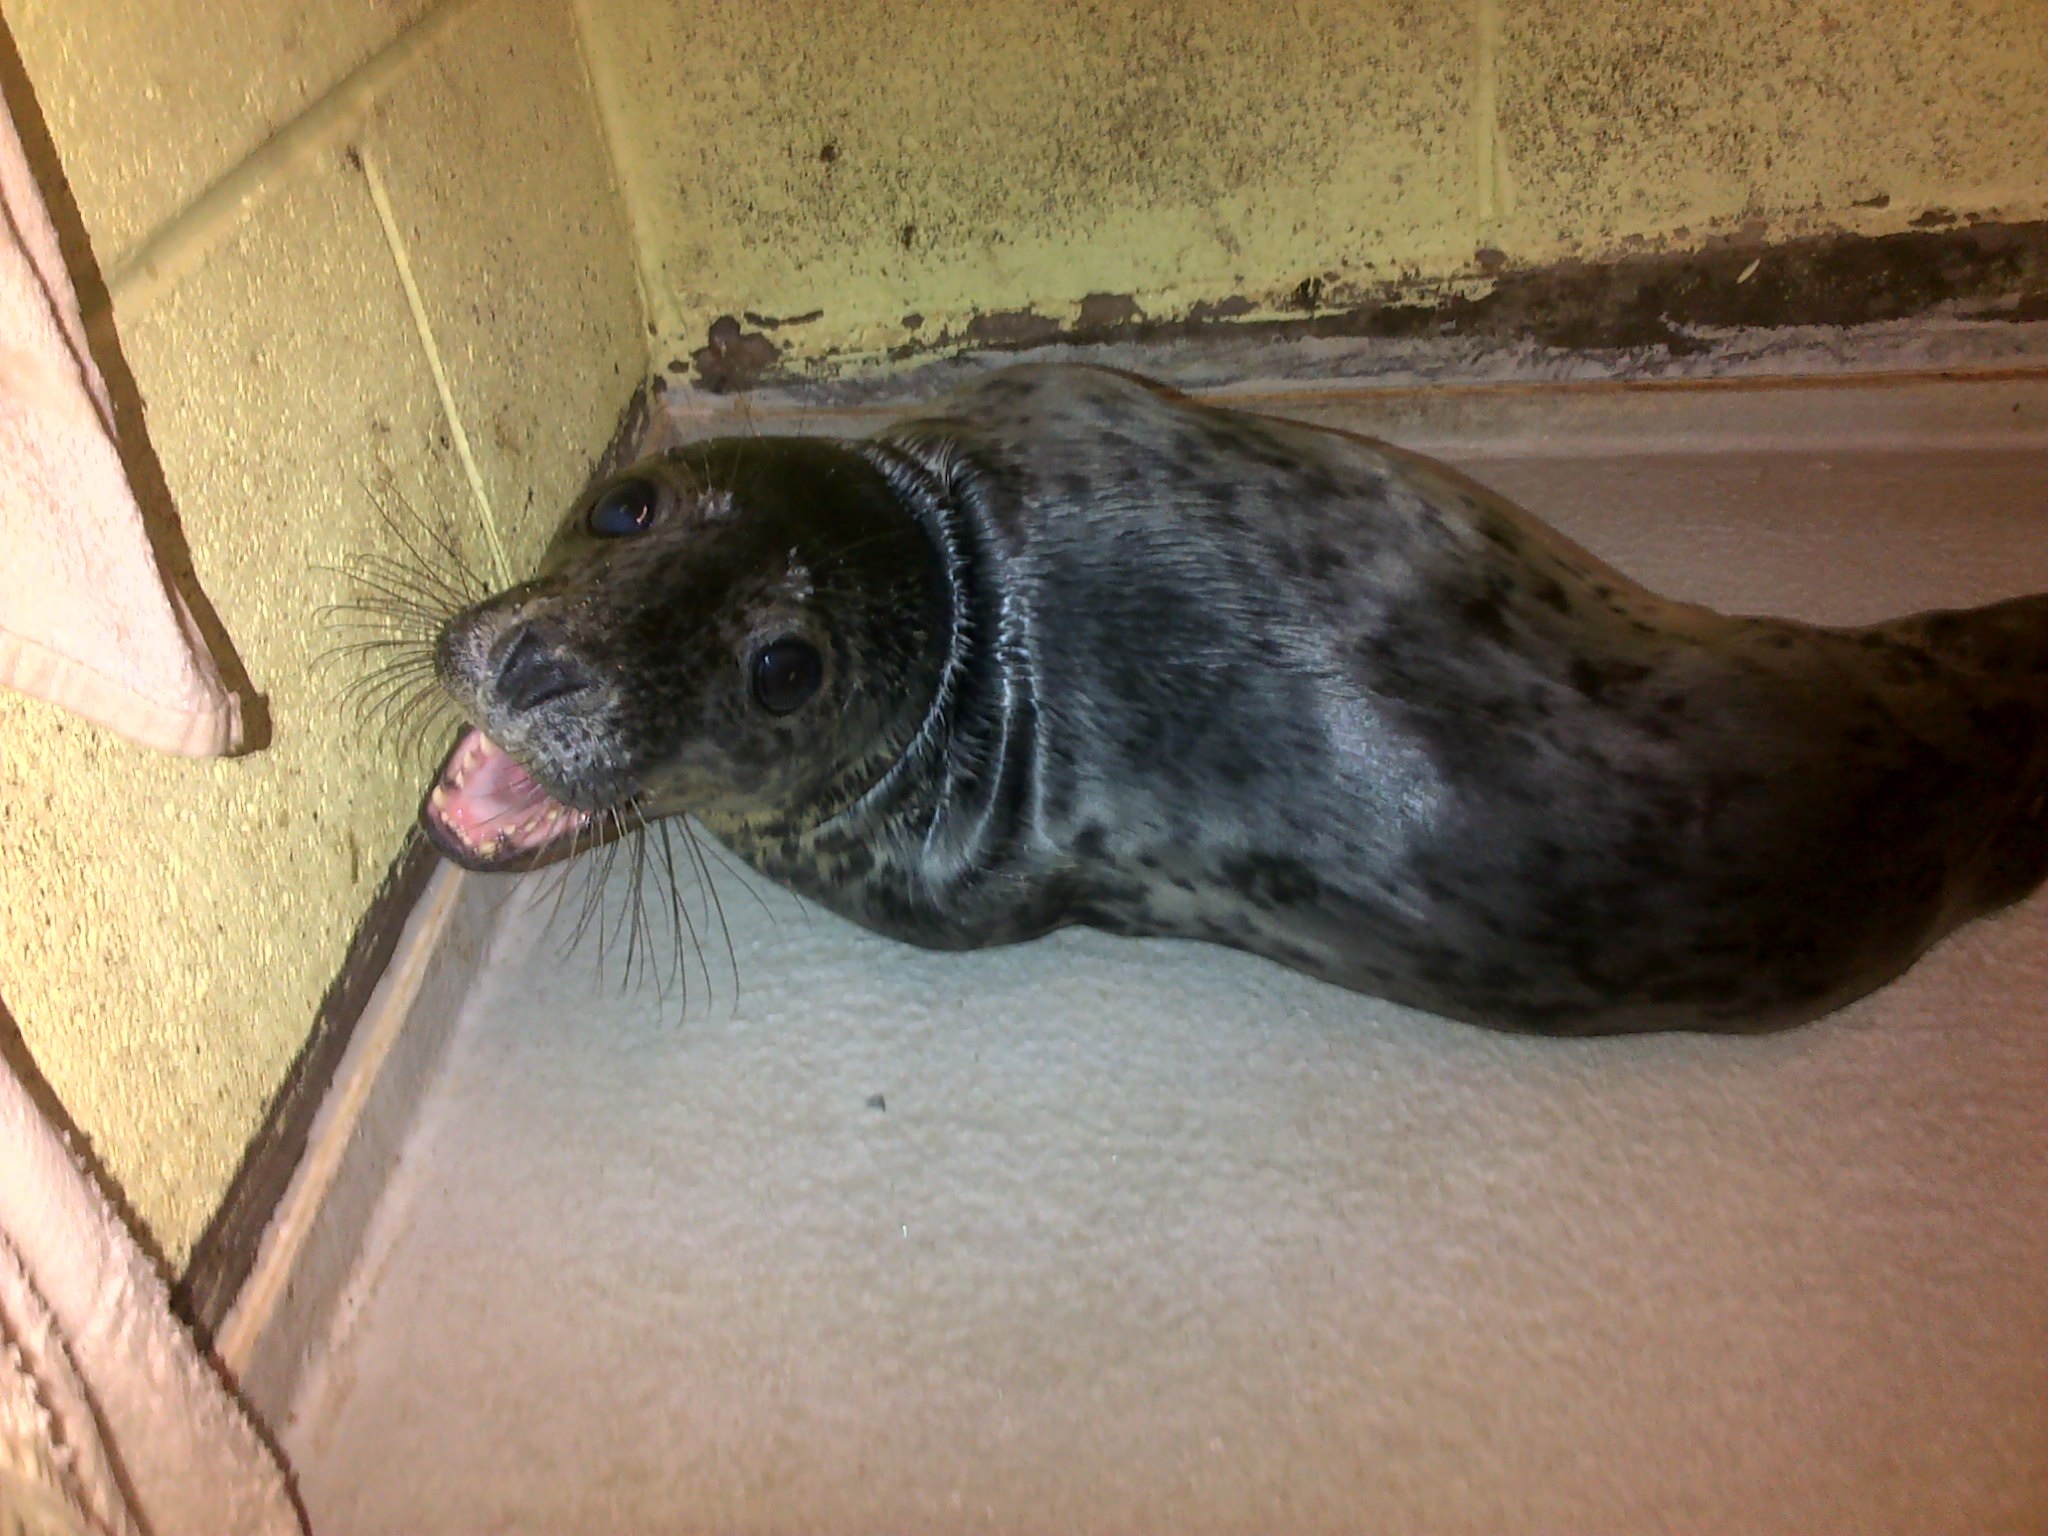 The seal pup has been name Rose after it was found at Rosemarkie Beach.